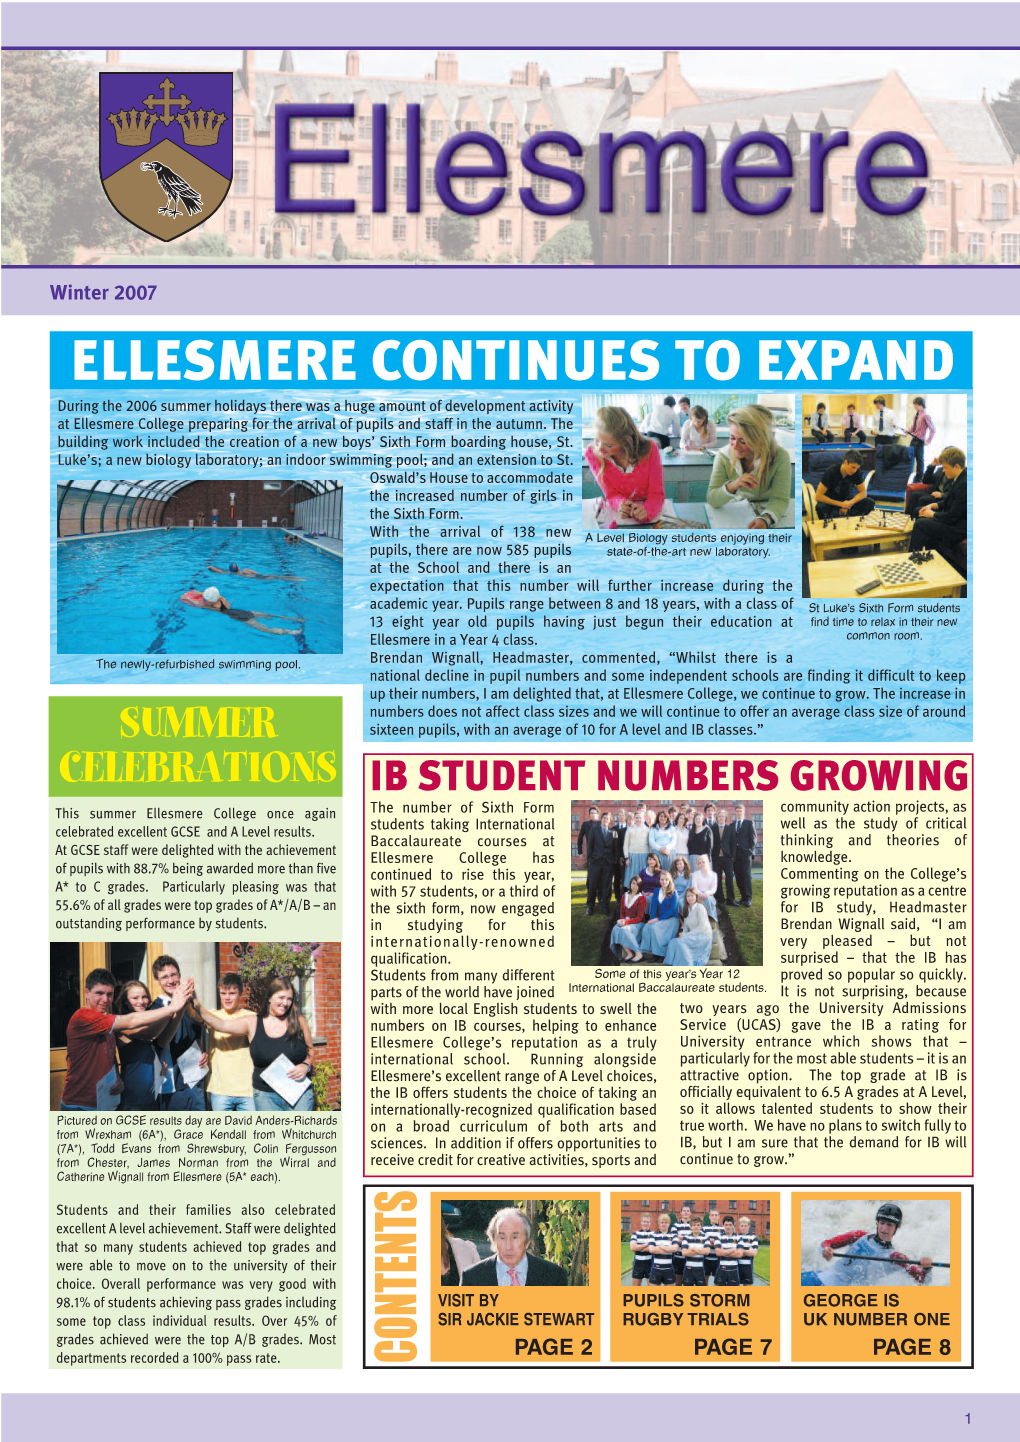 Ellesmere Continues to Expand